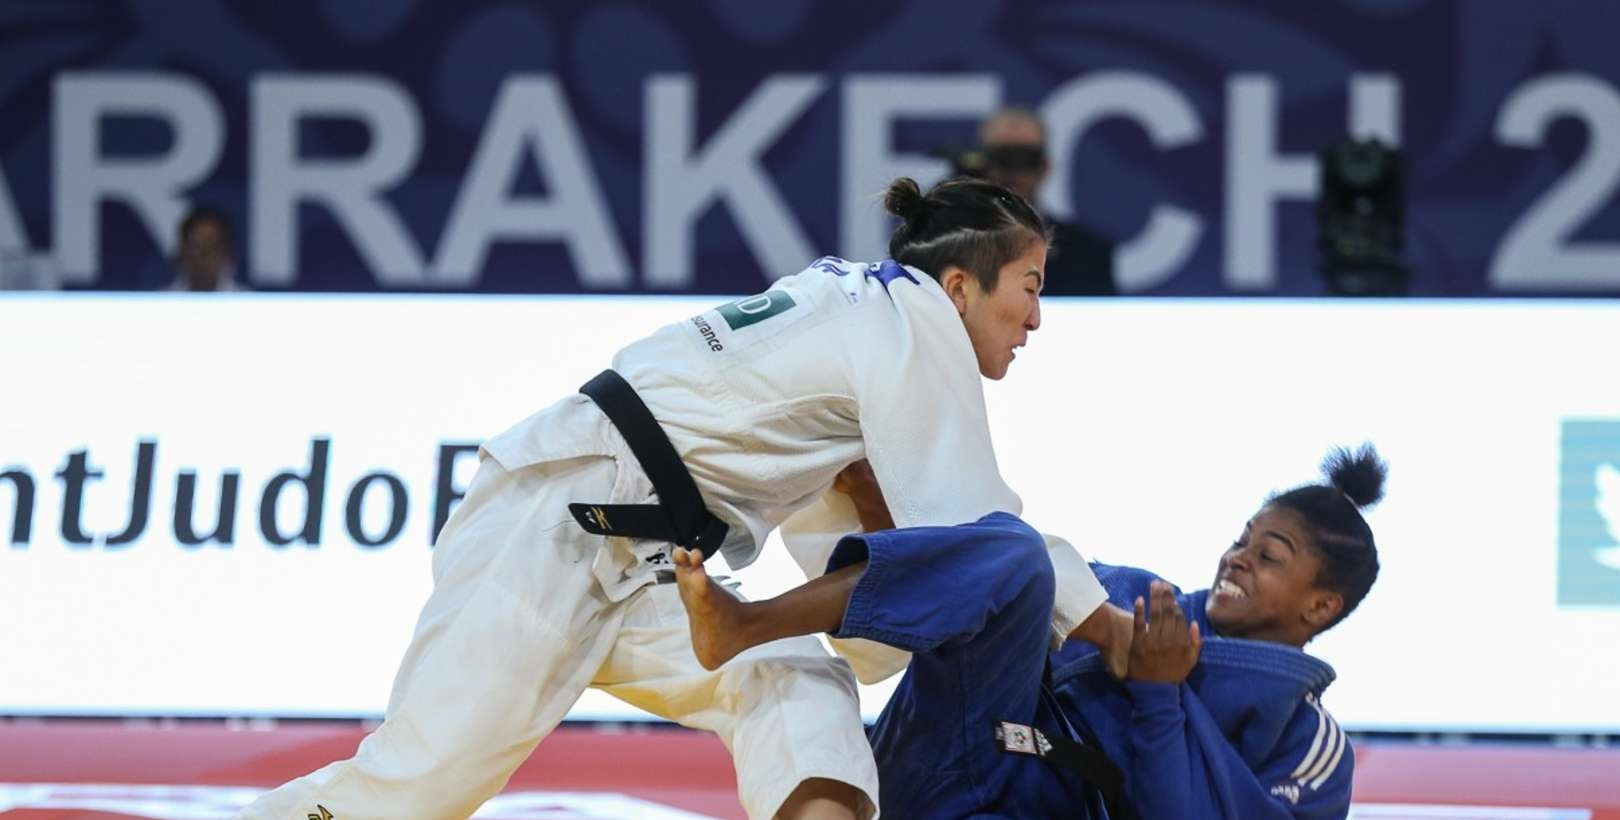 South Africa’s Geronay Whitebooi delighted the home crowd by claiming the women’s under-48 kilograms gold medal on the opening day of the African Senior Judo Championships in Cape Town ©IJF